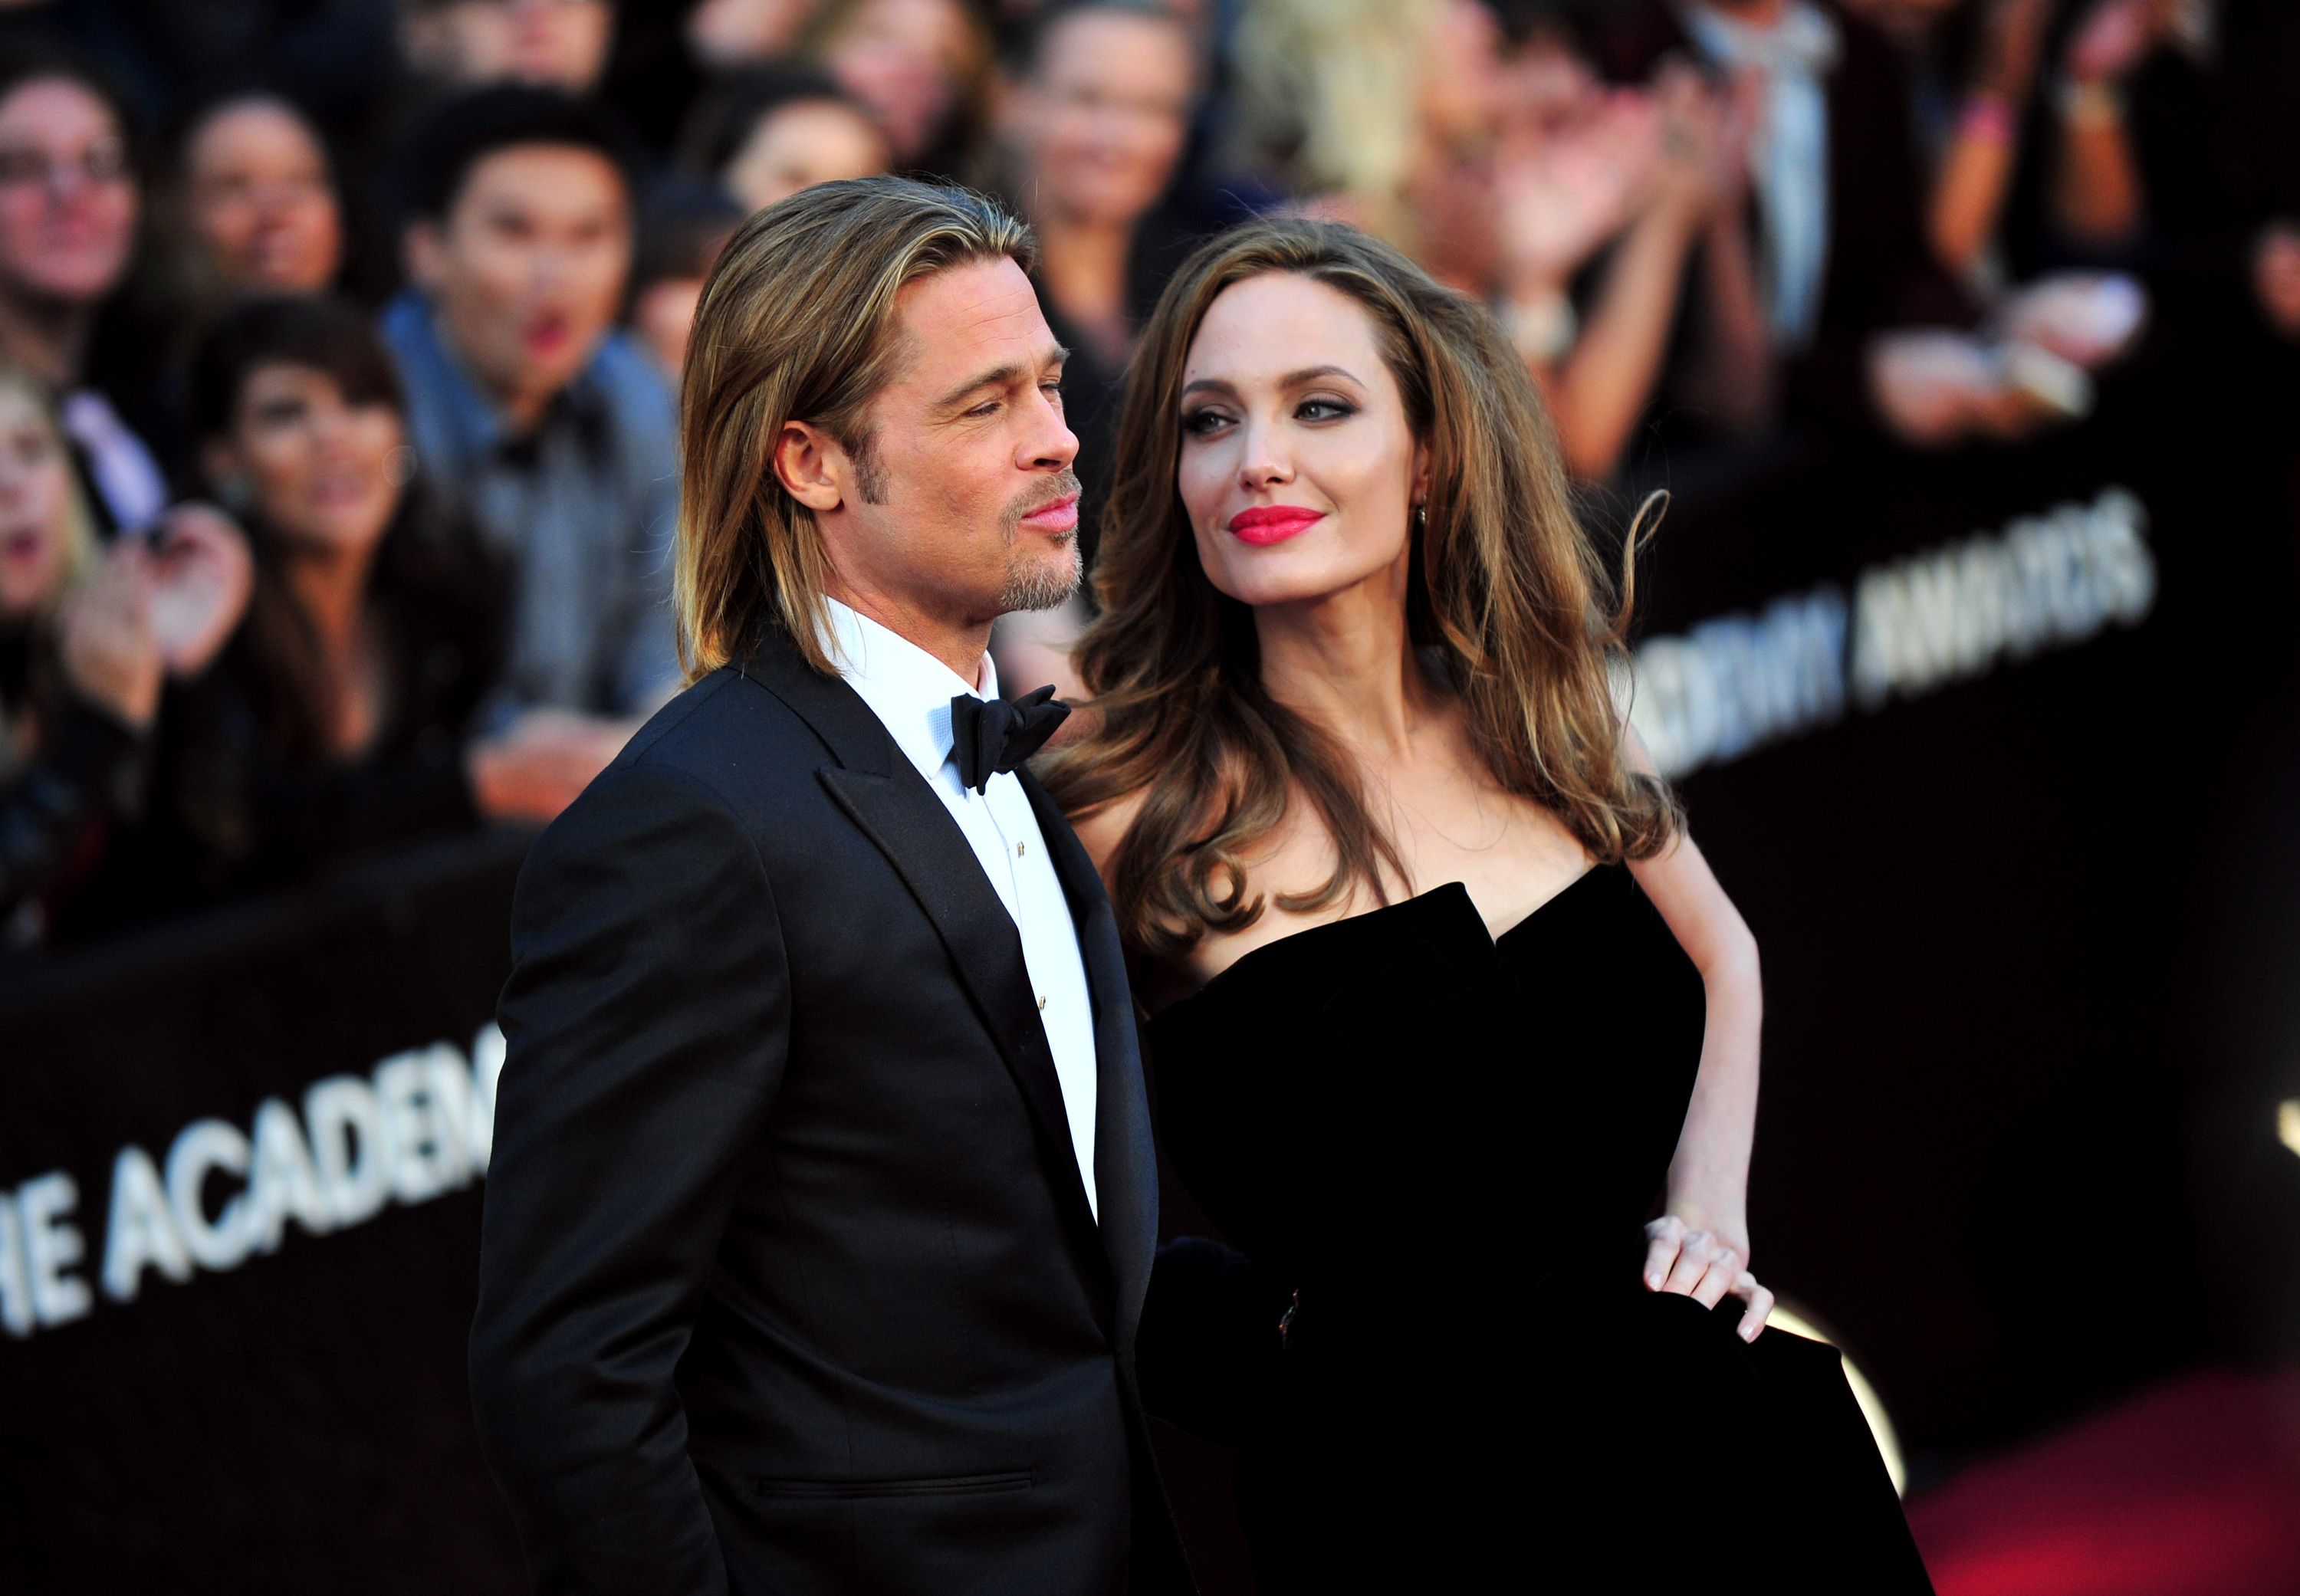 Brad Pitt and Angelina Jolie arrive on the red carpet at the 84th Academy Awards at the Hollywood and Highlands Center in the Hollywood section of Los Angeles on February 26, 2012. UPI/Kevin Dietsch / eyevine Contact eyevine for more information about using this image: T: +44 (0) 20 8709 8709 E: info@eyevine.com http://www.eyevine.com